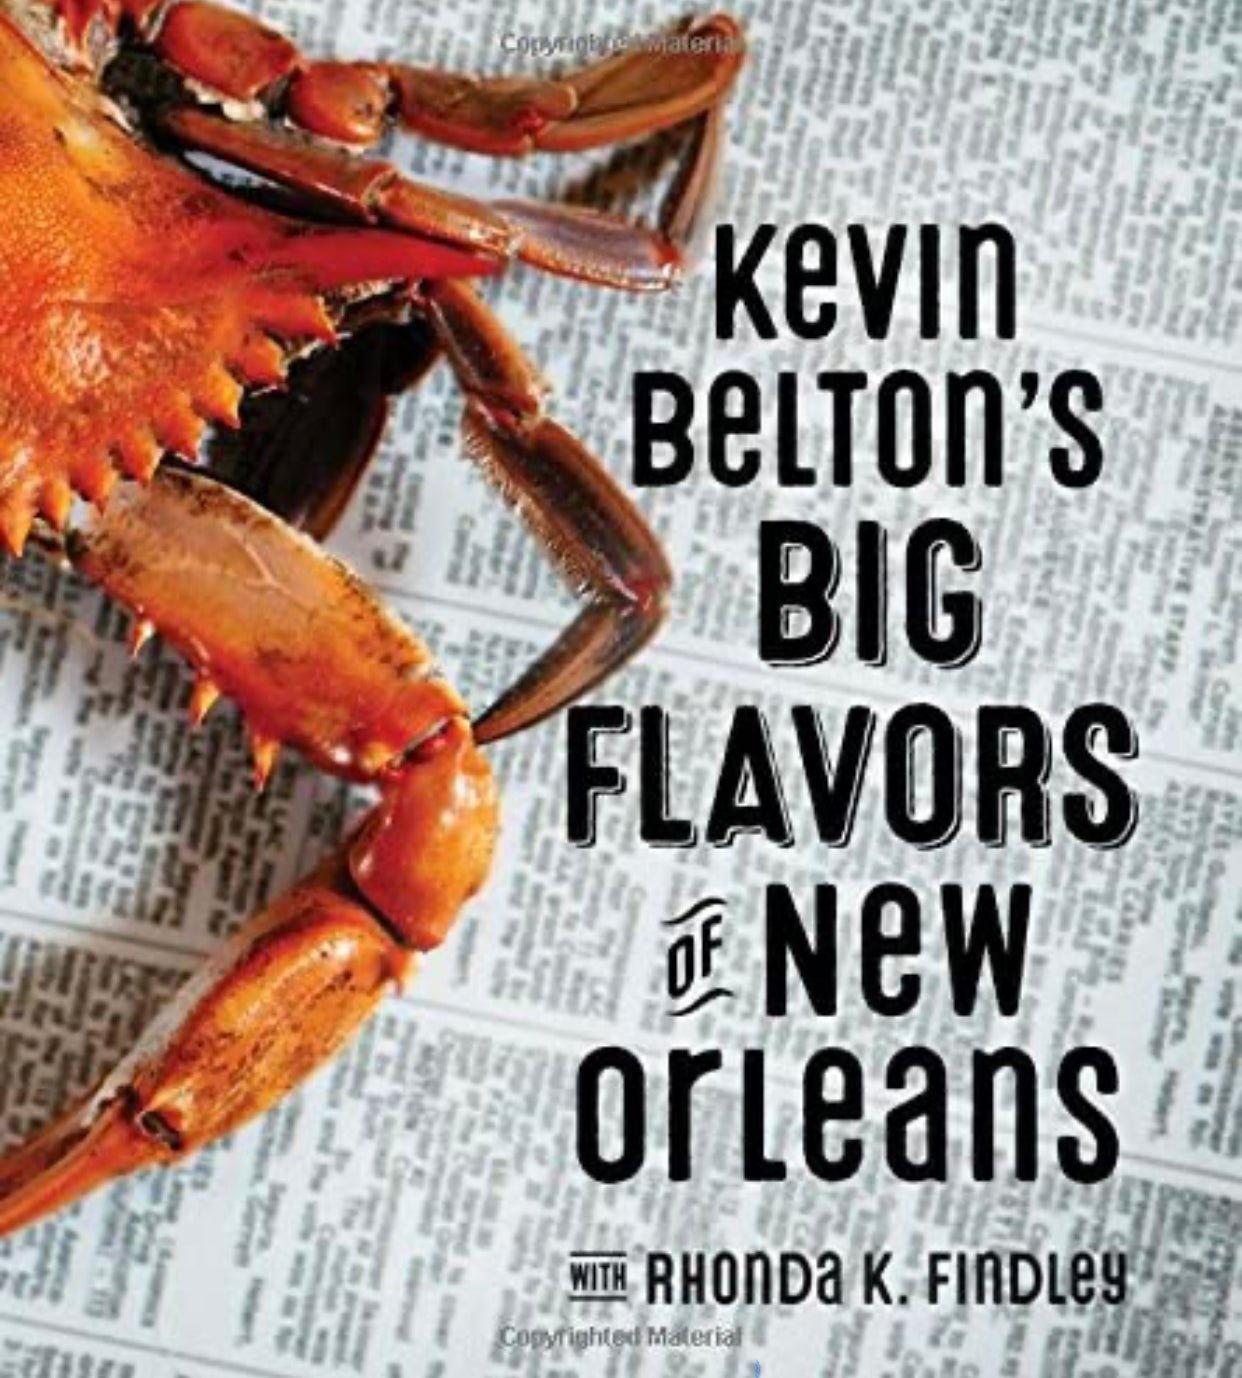 Kevin Belton’s Big Flavors of New Orleans